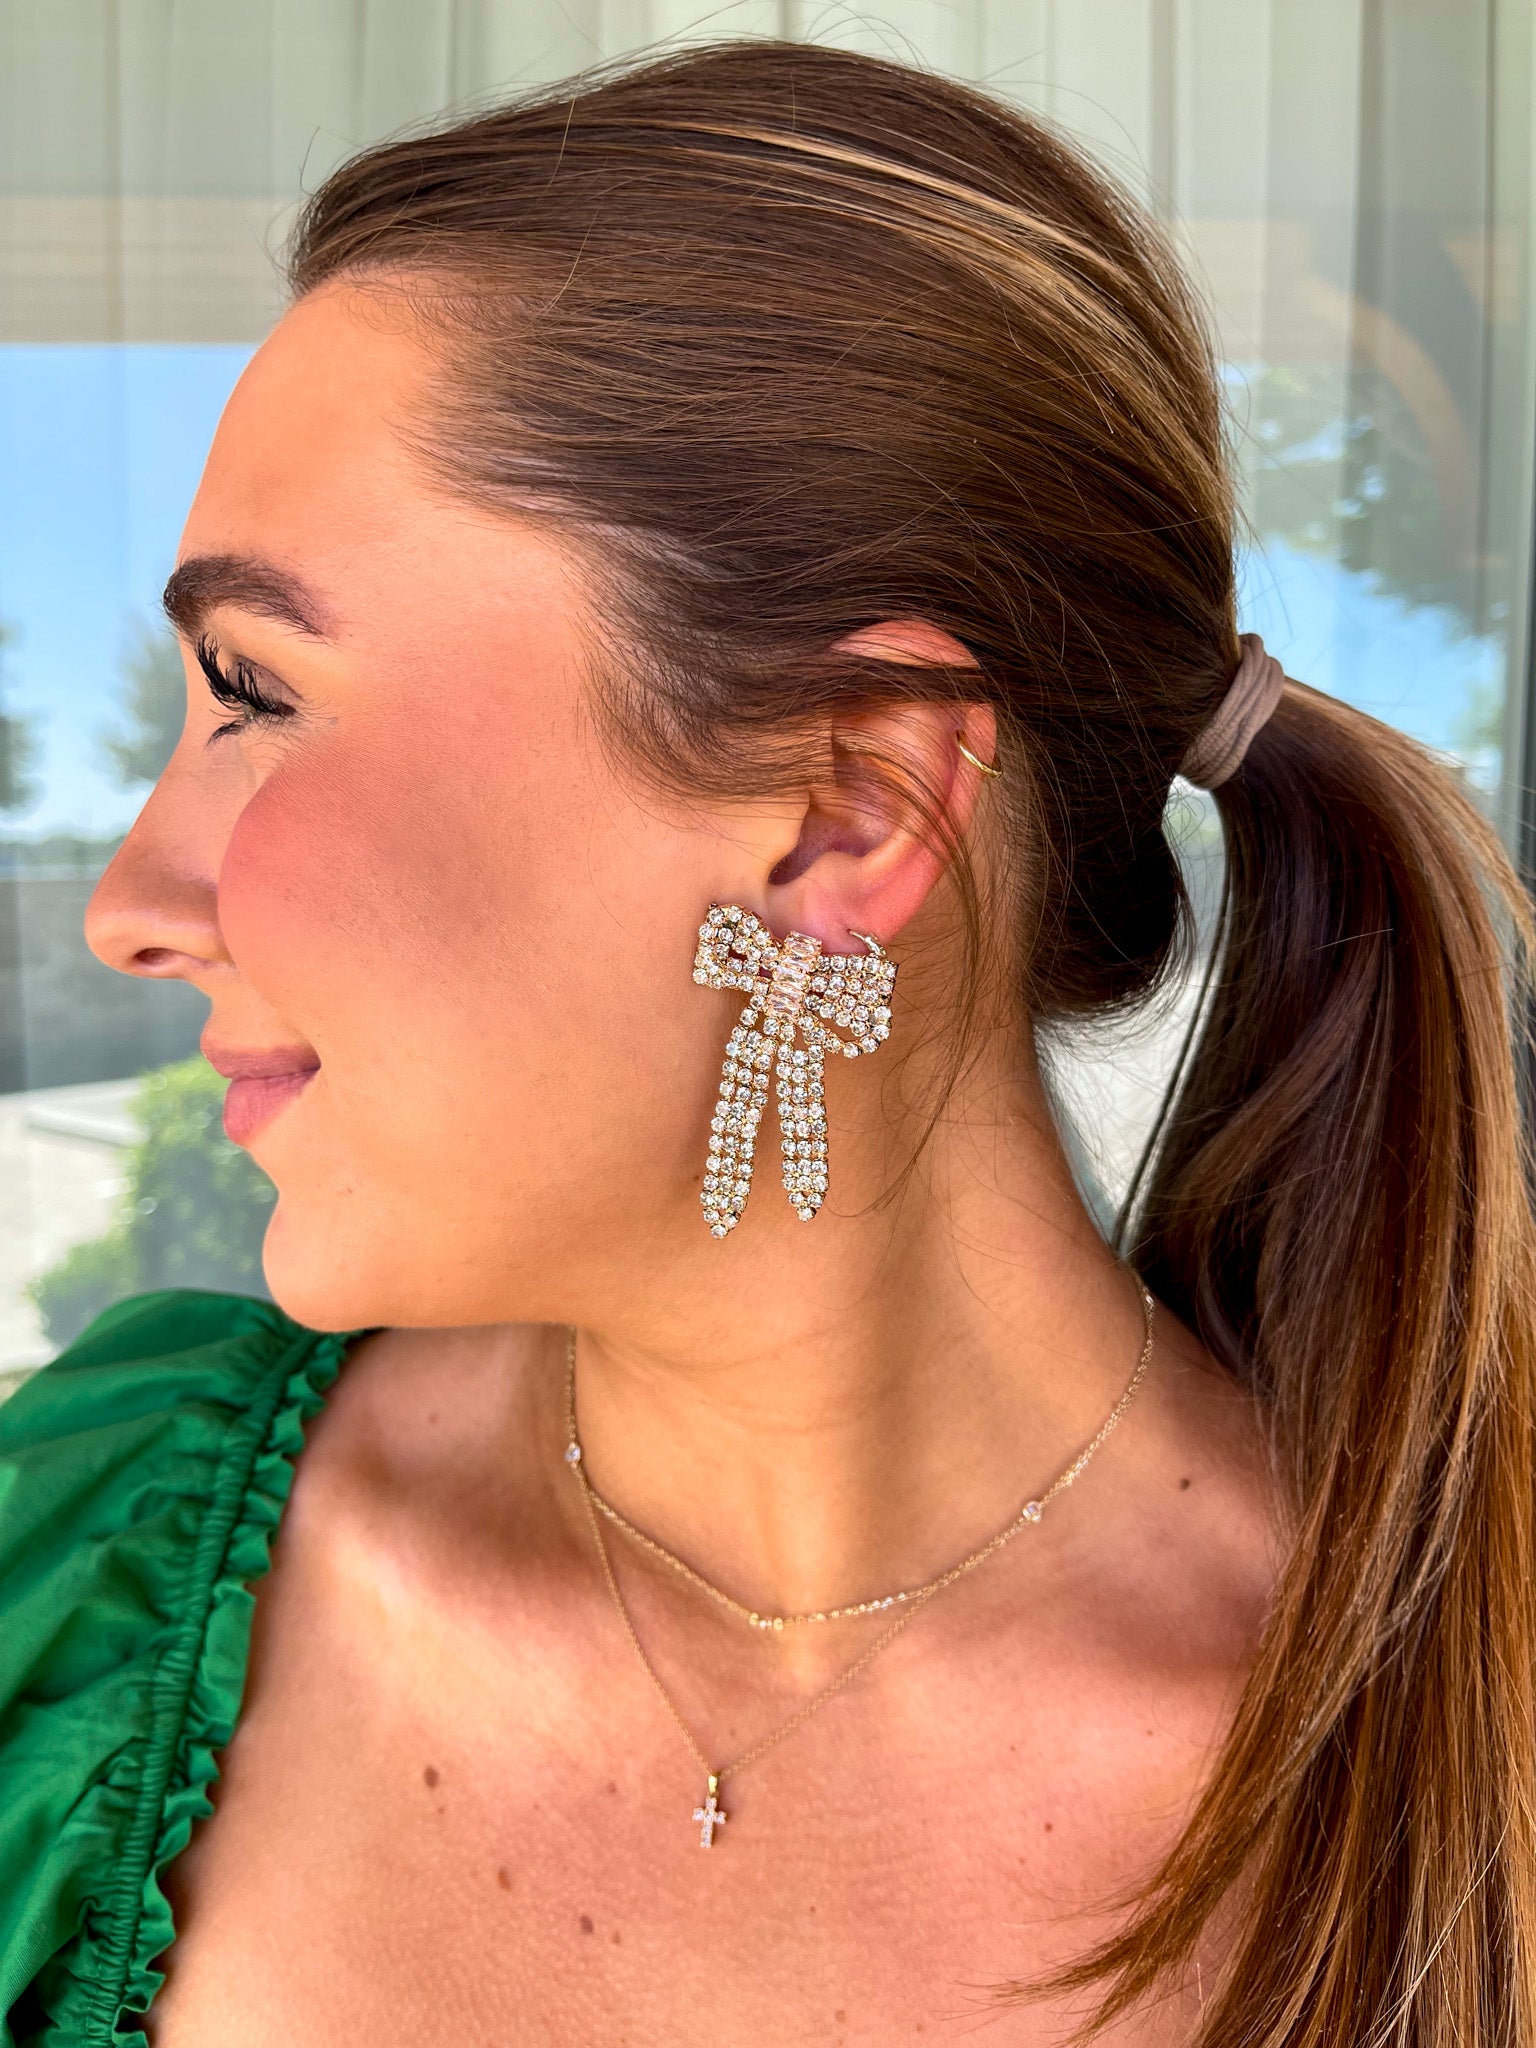 Woman with sparkling earrings